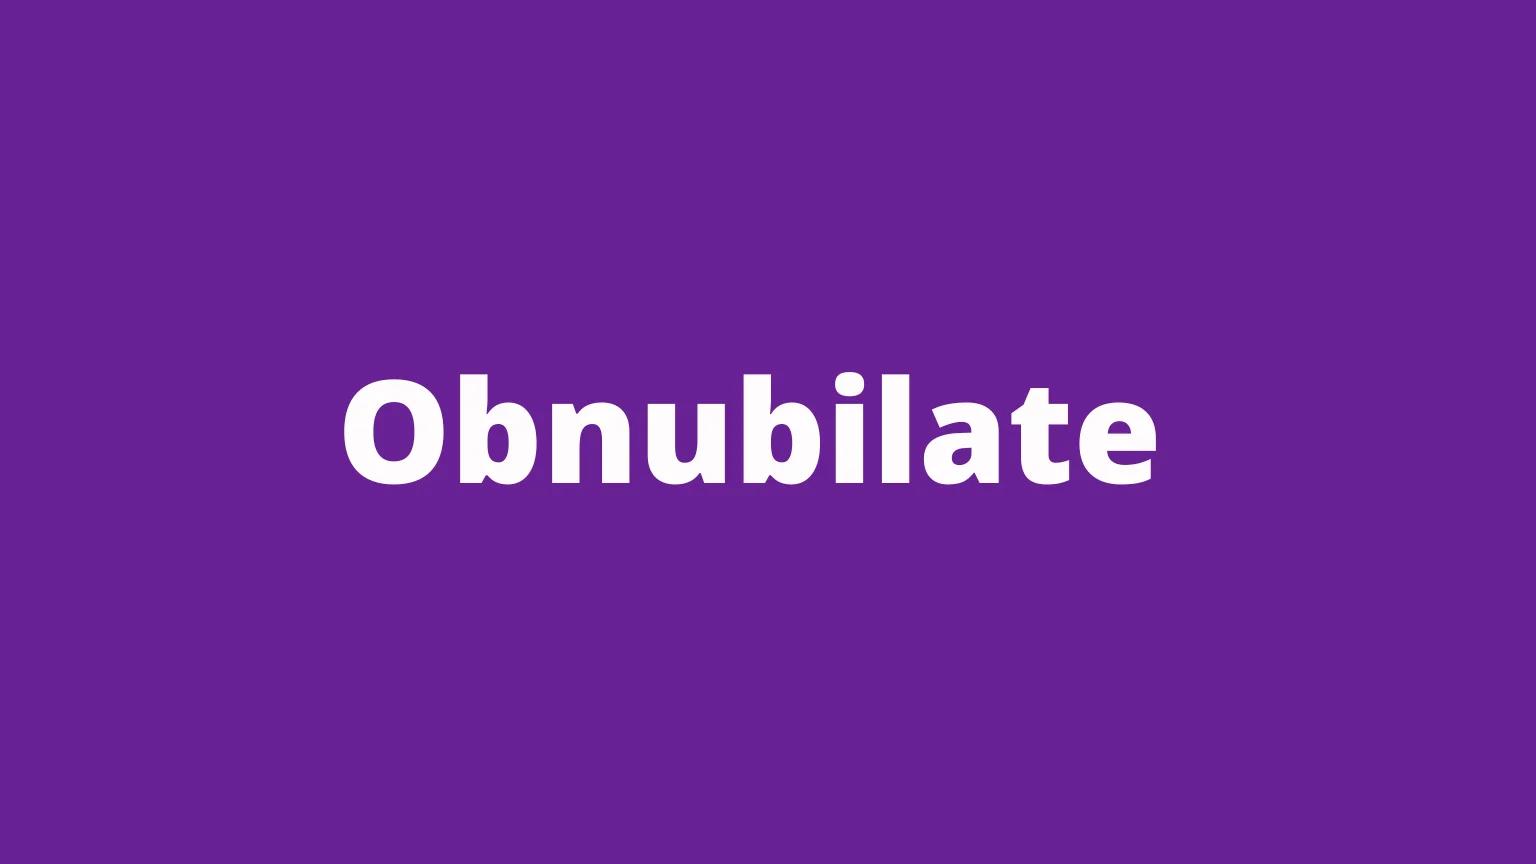 The word obnubilate and its meaning